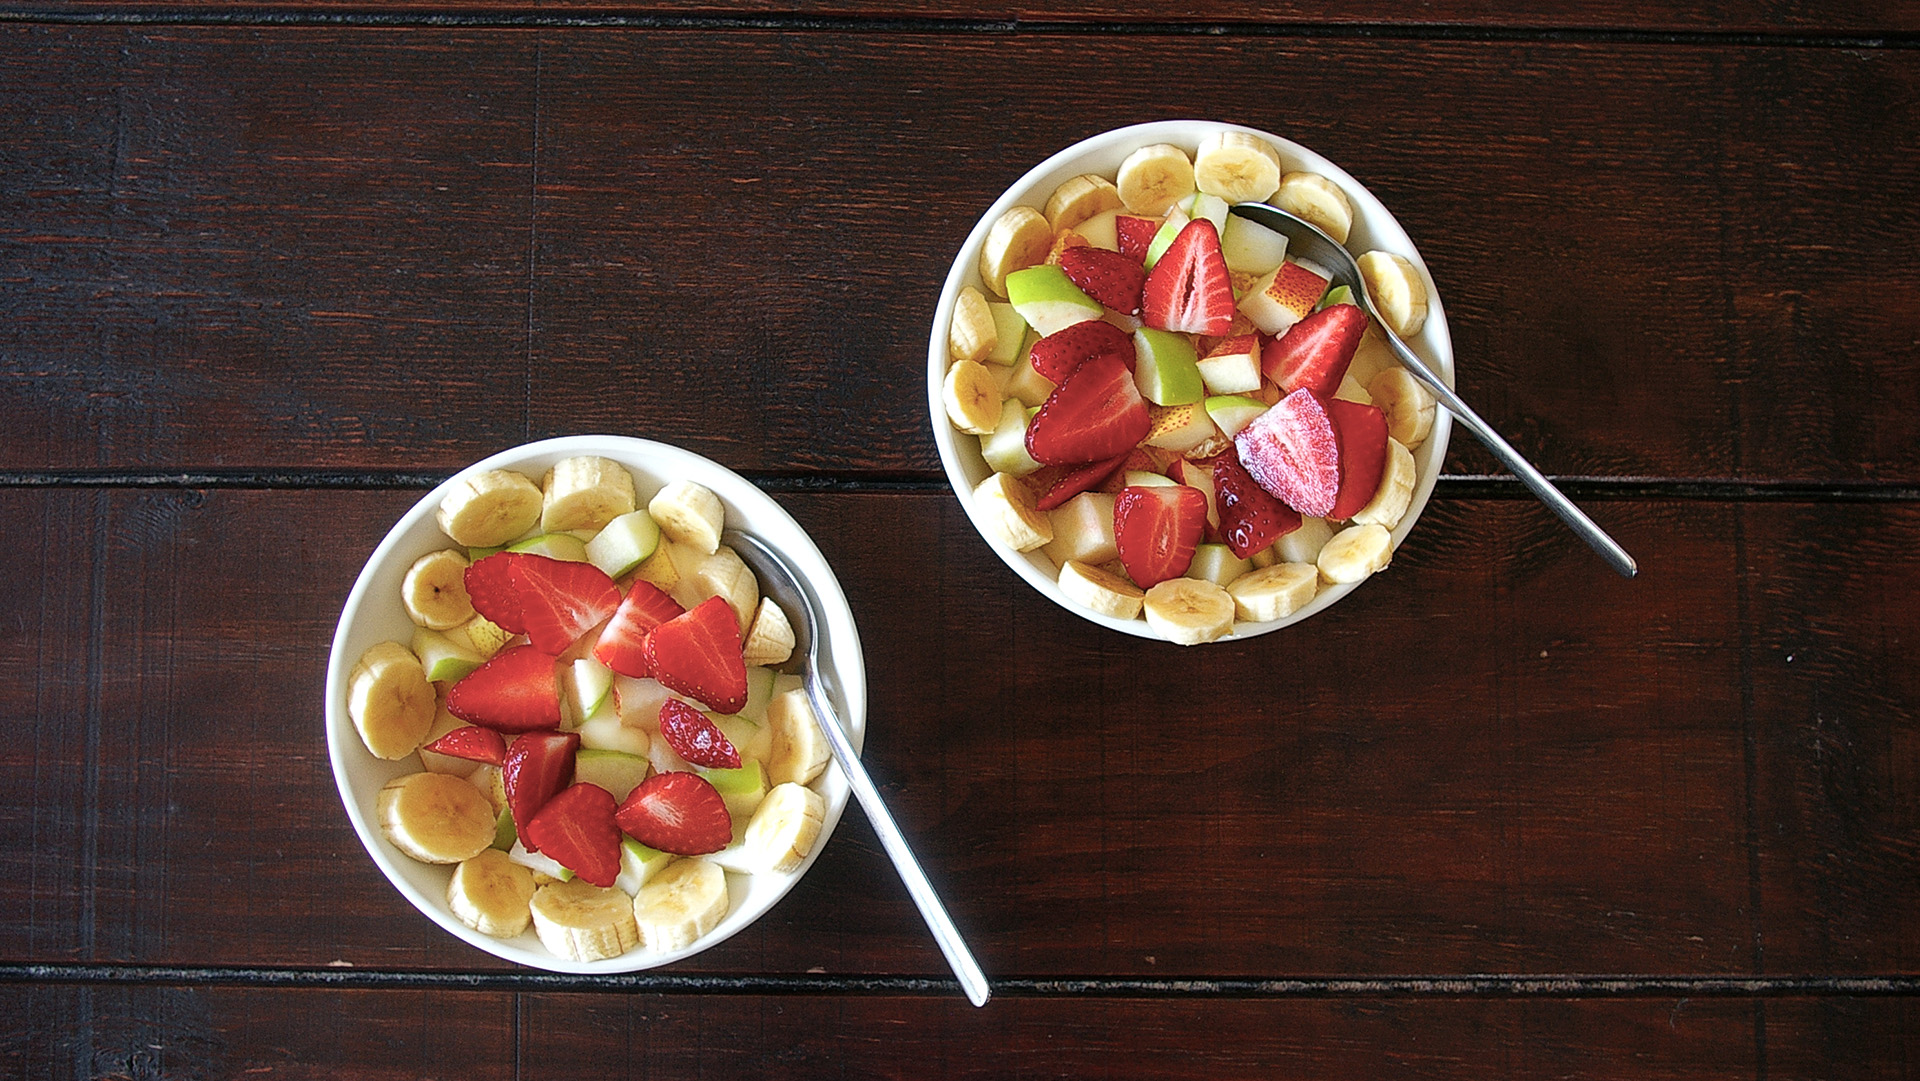 Two portions of fruit salad for breakfast